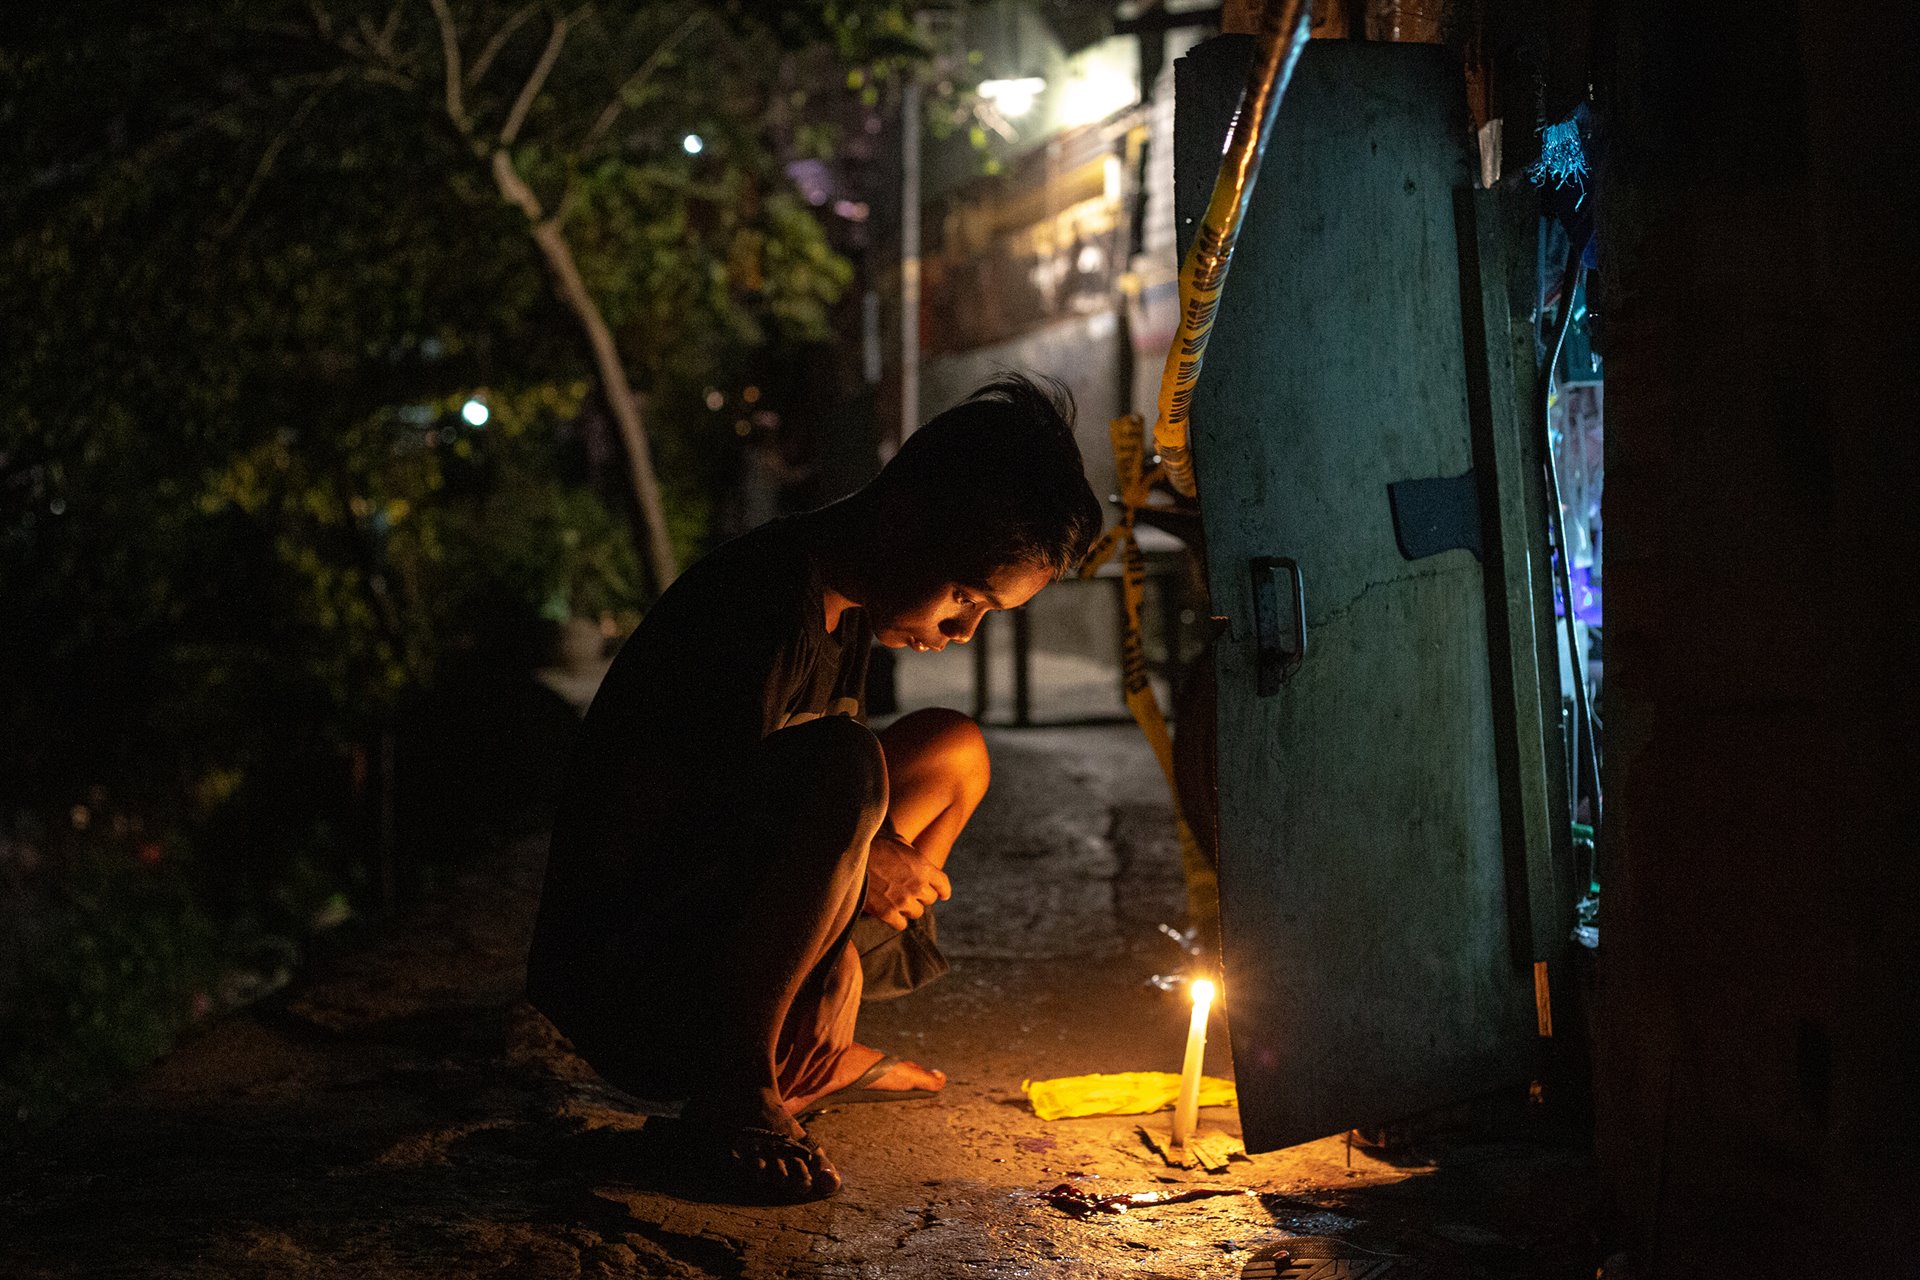 <p>AJ (16) mourns at the scene where unidentified assailants have shot his neighbor Antonio Perez outside his home in Pasay City, the Philippines.&nbsp;</p>
